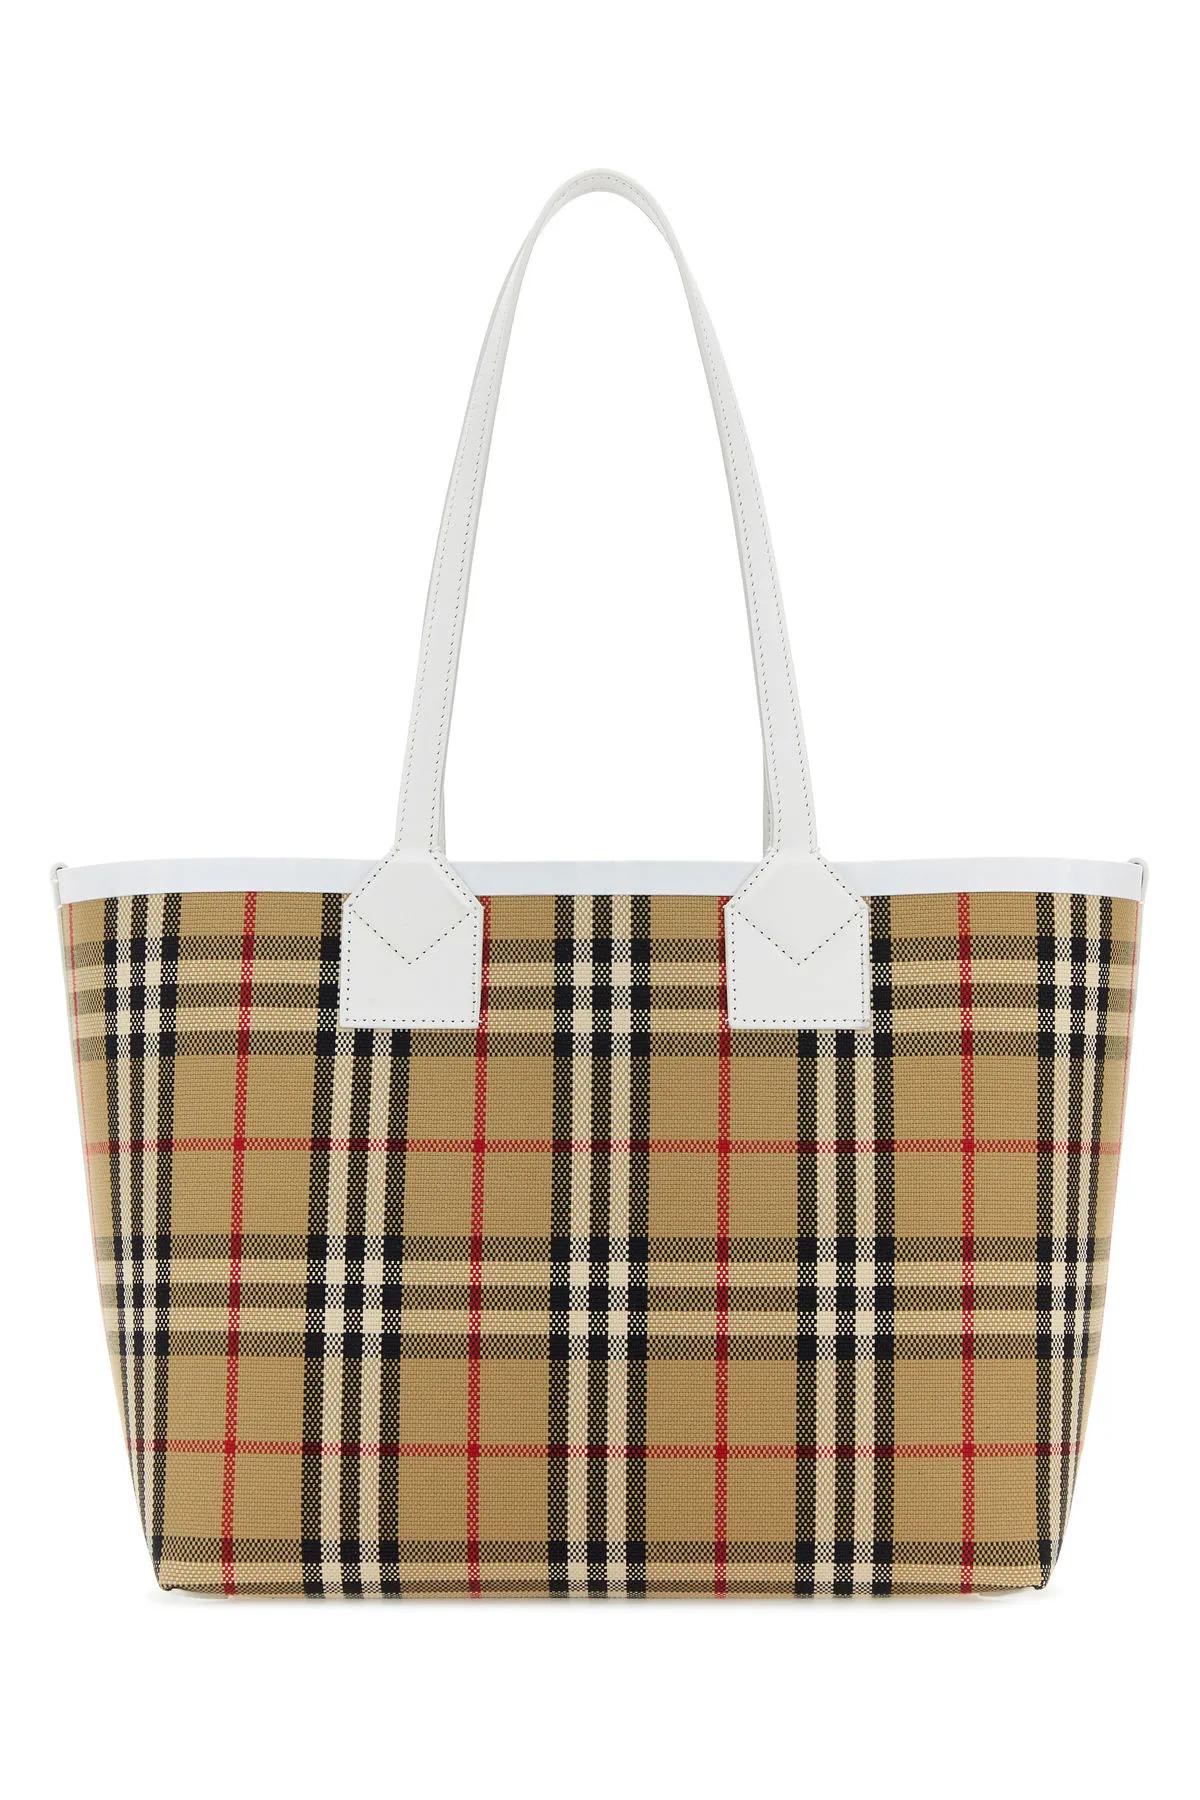 BURBERRY EMBROIDERED CANVAS SMALL LONDON SHOPPING BAG